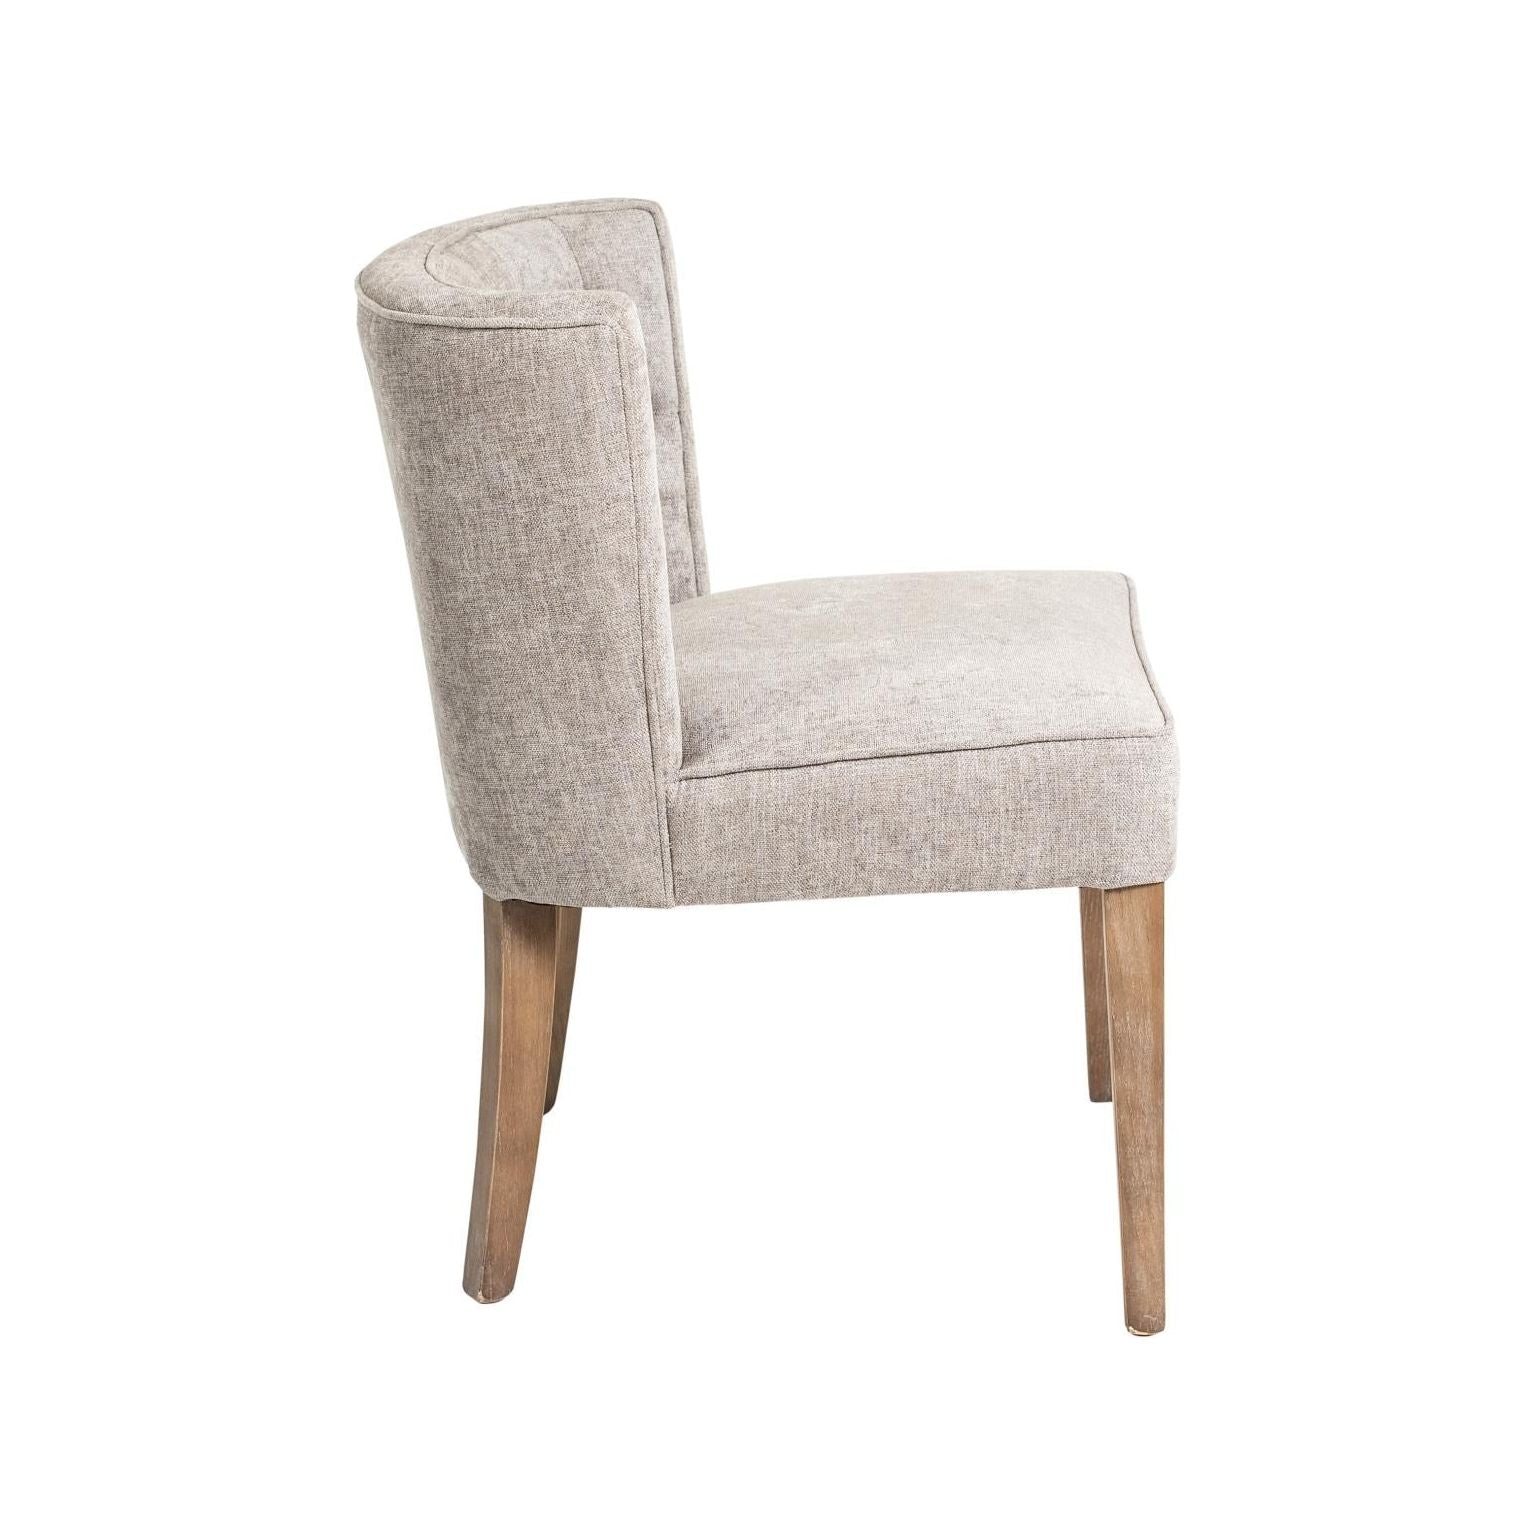 A modern, elegant Charlie Dining Chair with a curved back and a comfortable, padded seat, upholstered in a light grey fabric, standing on four wooden legs with a natural finish, isolated on a white background.